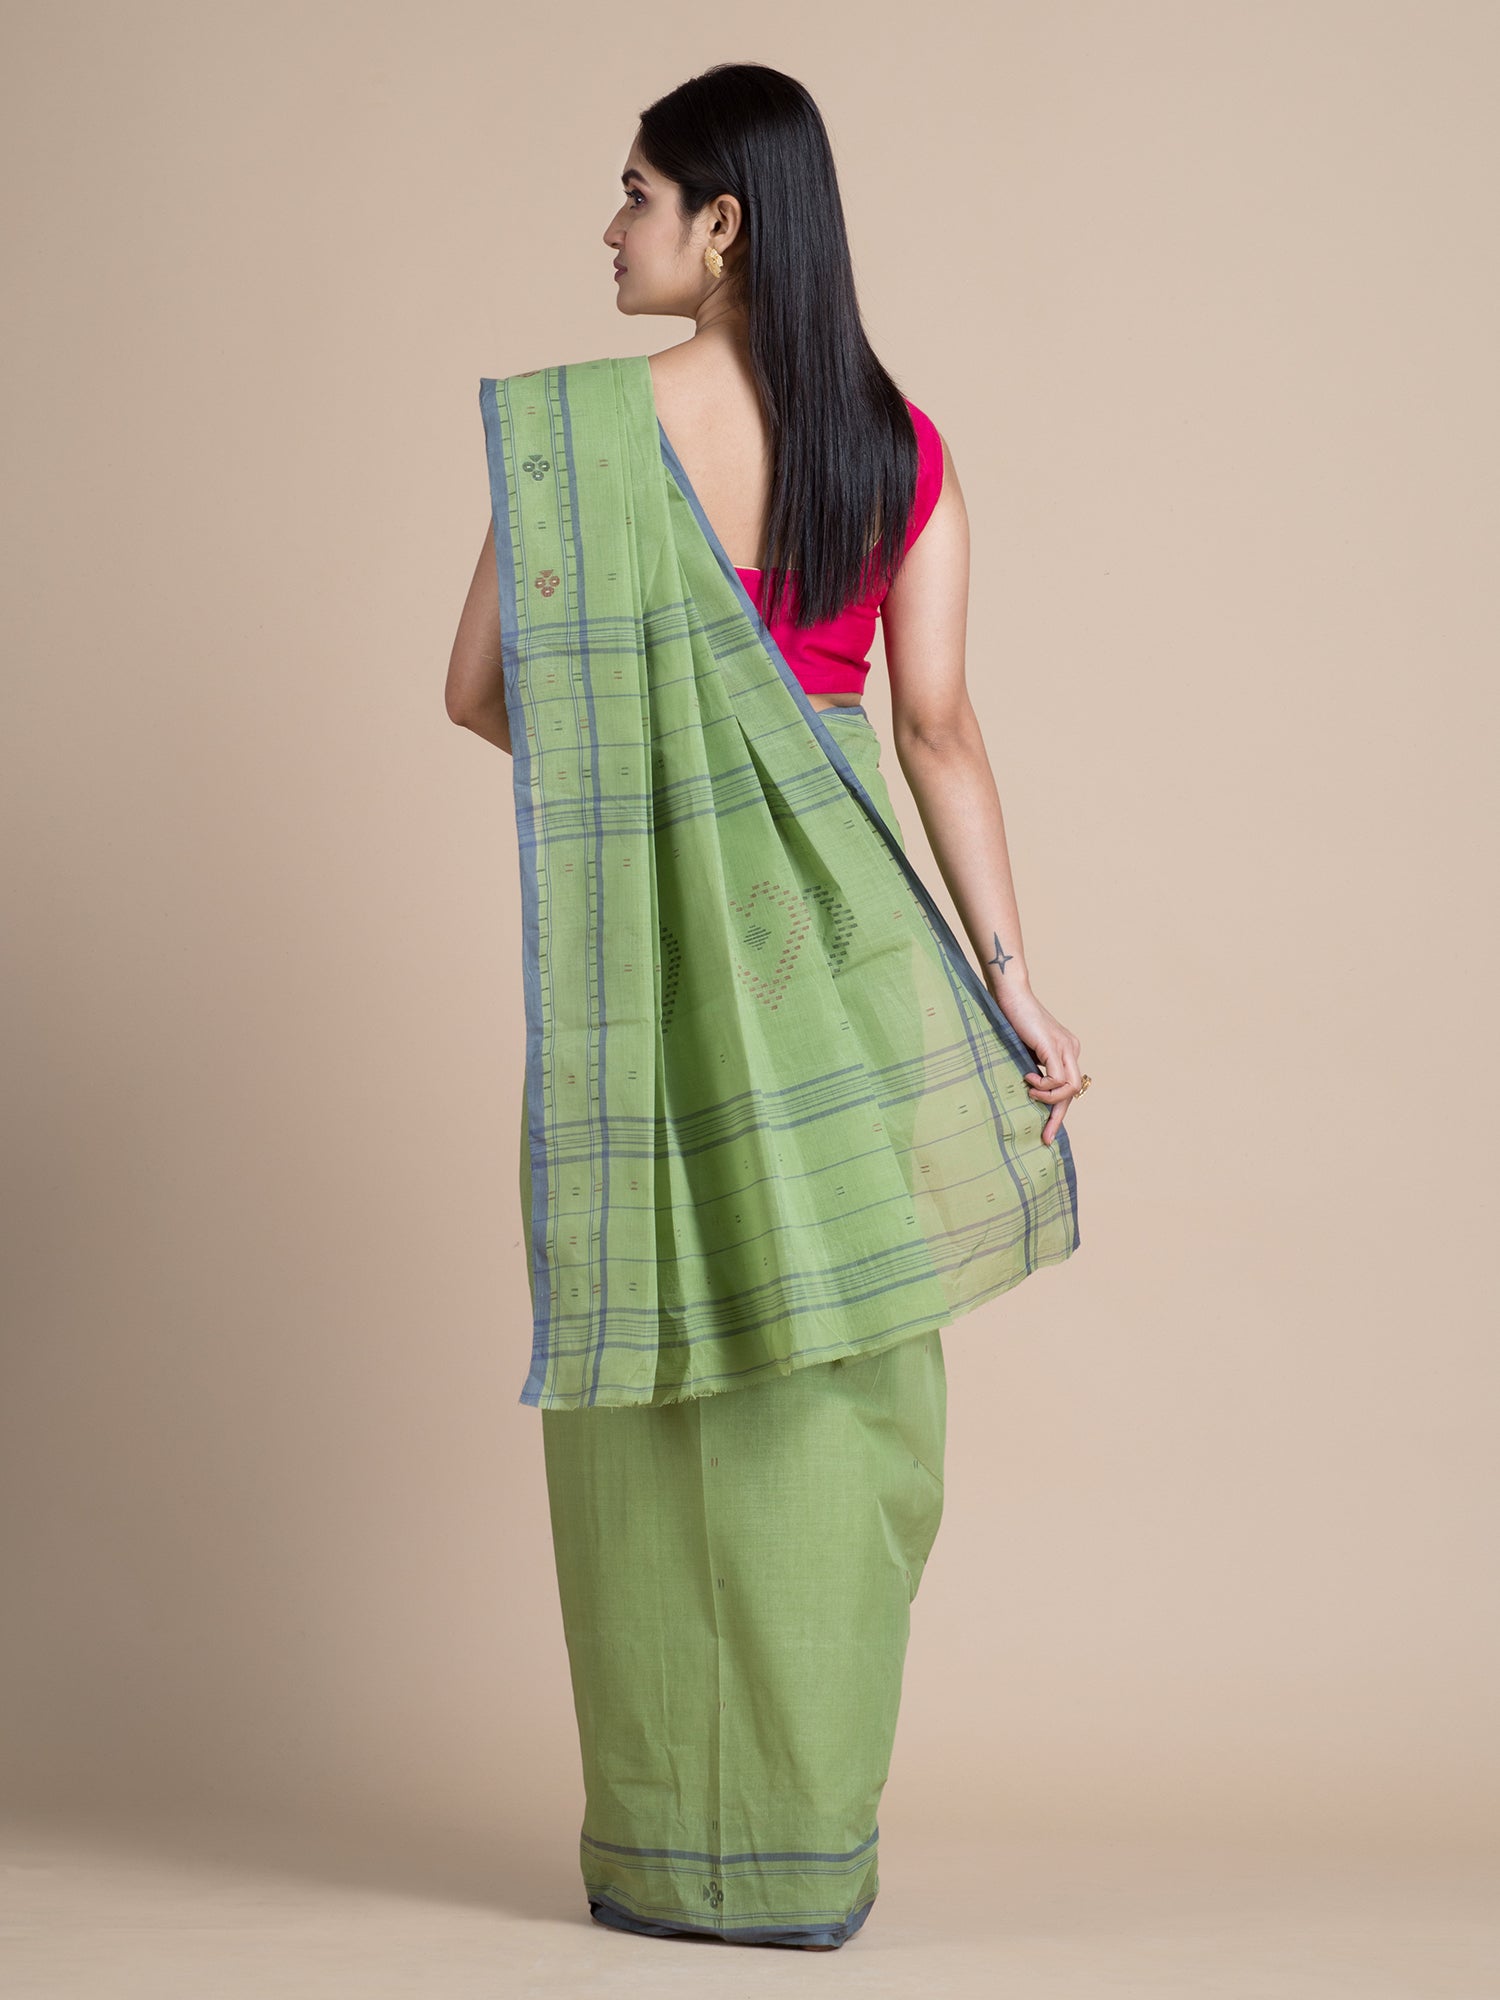 Women's Green Pure Cotton Hand Woven Saree With Buti Work Without Blouse-Sajasajo